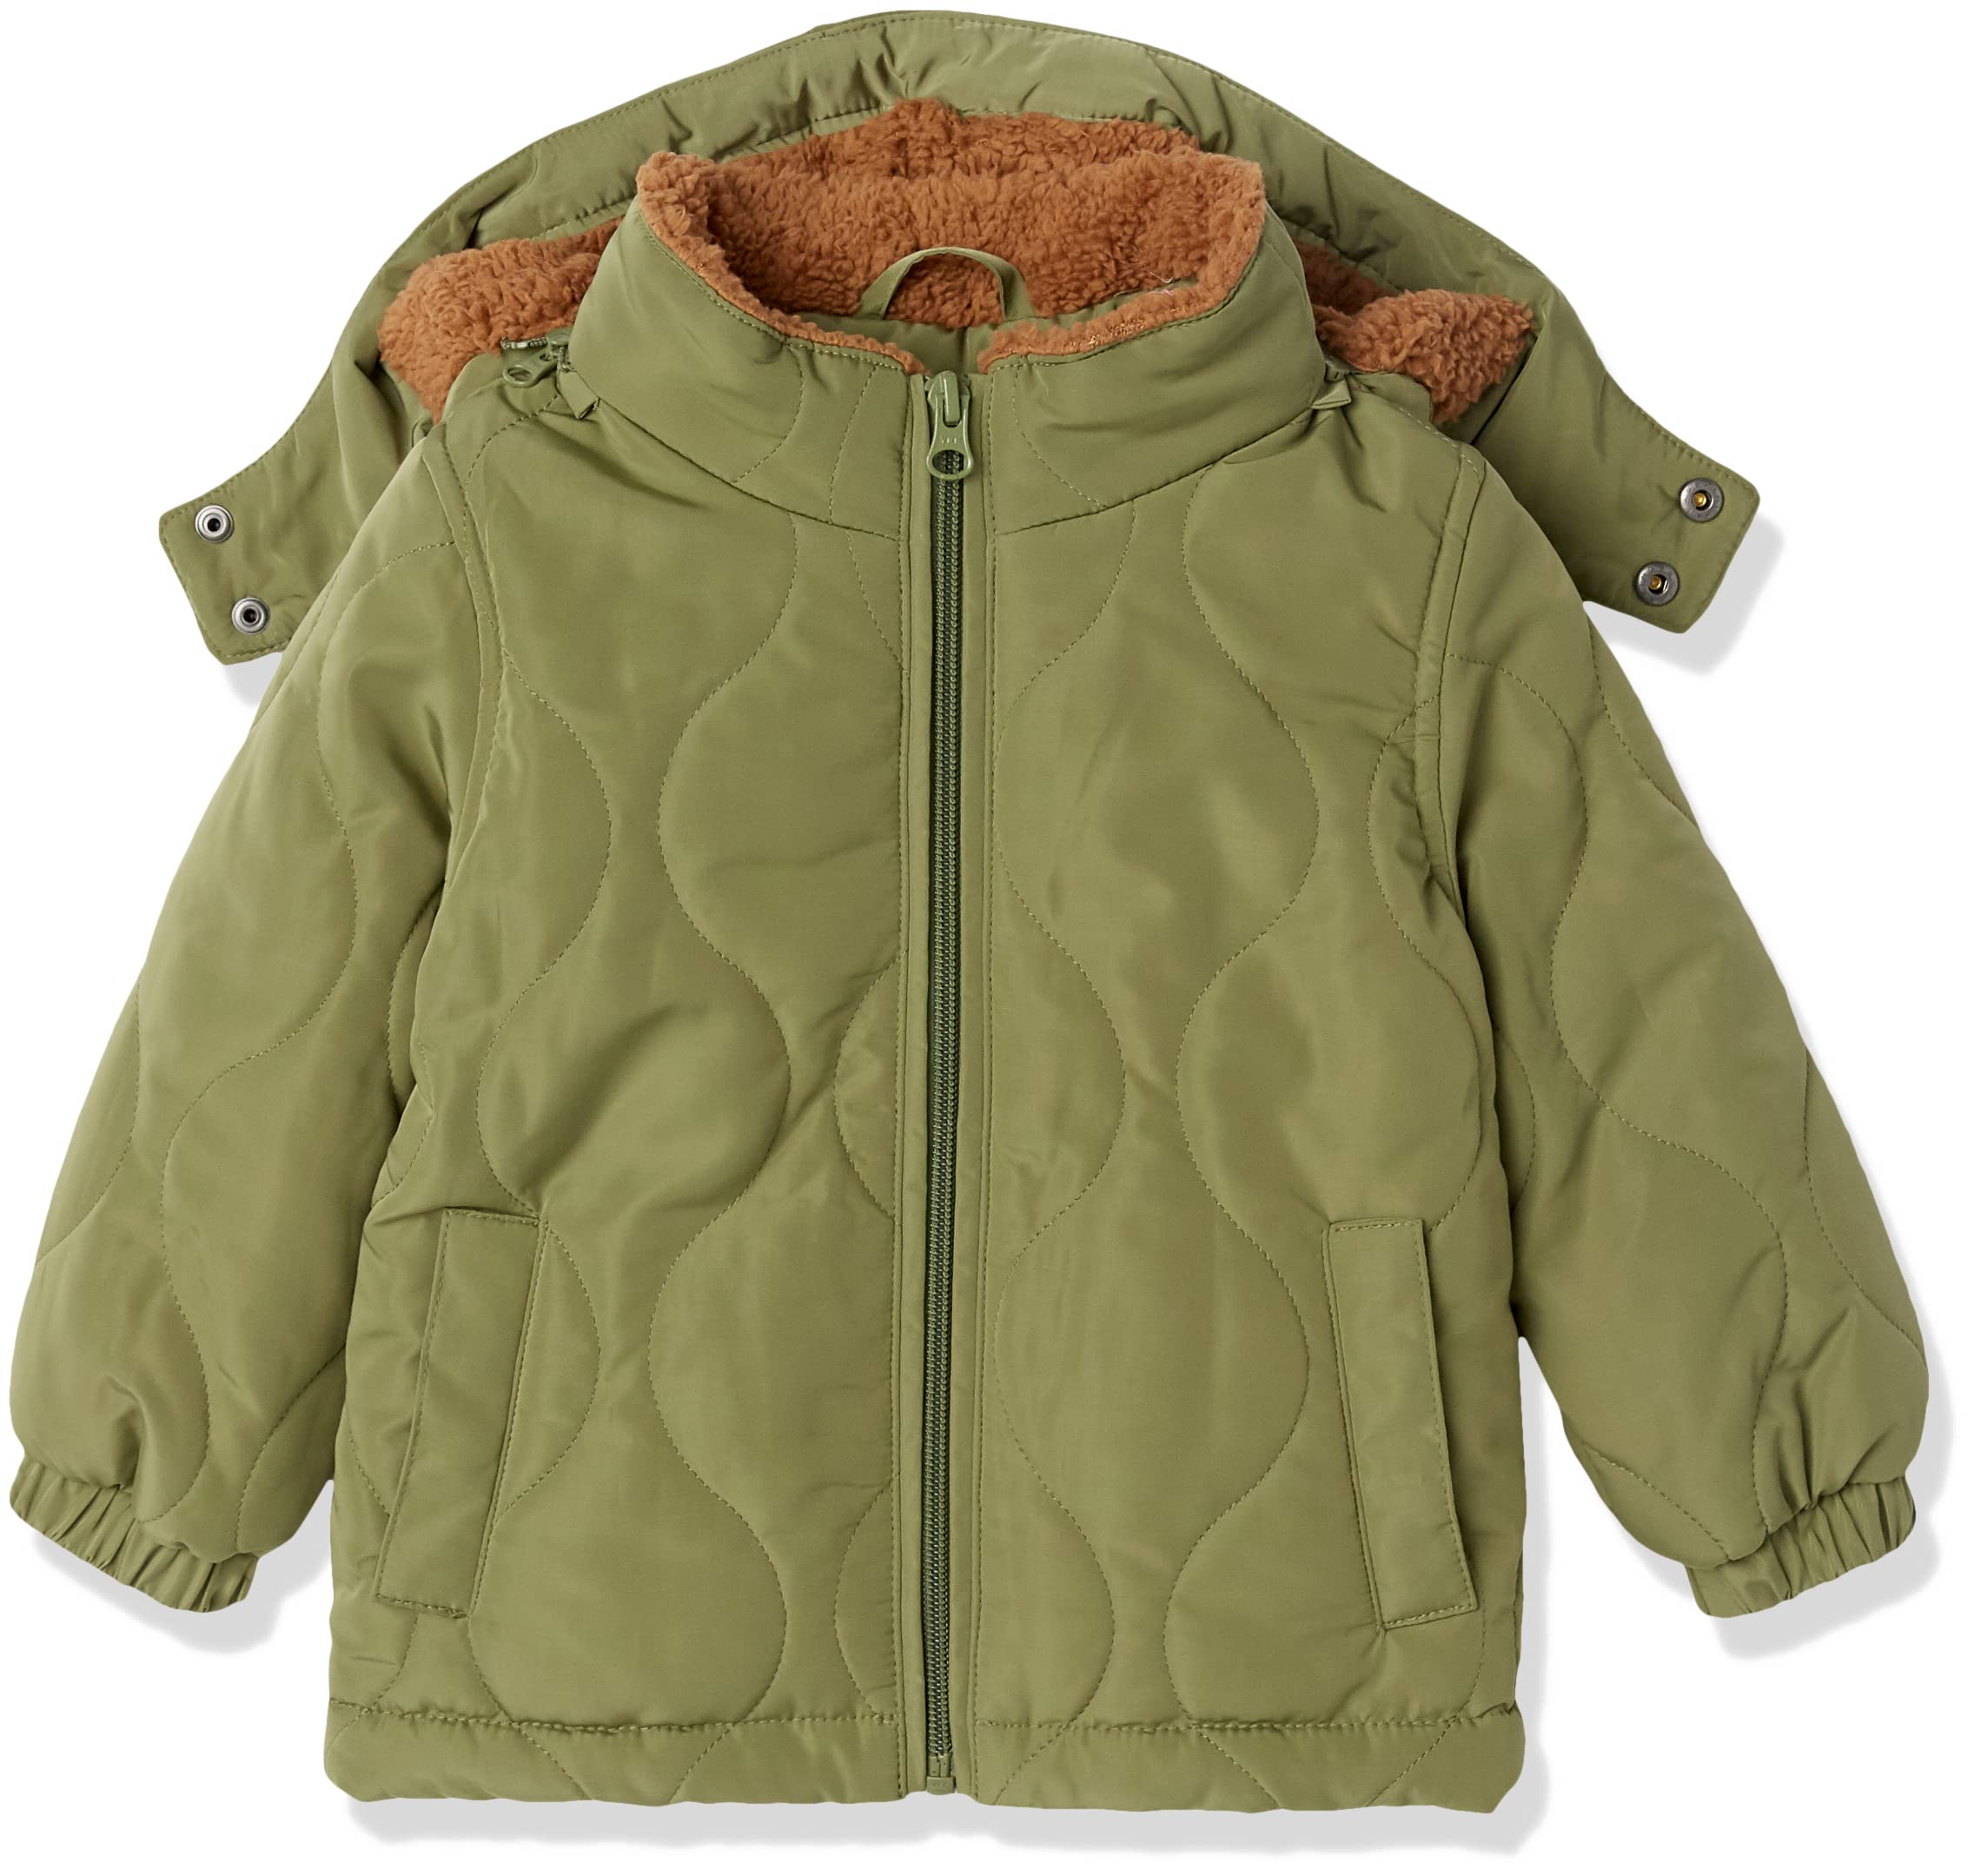 Amazon Essentials Unisex Kids' Recycled Polyester Sherpa Lined Quilted Jacket (Previously Amazon Aware), Olive, Small $13.4